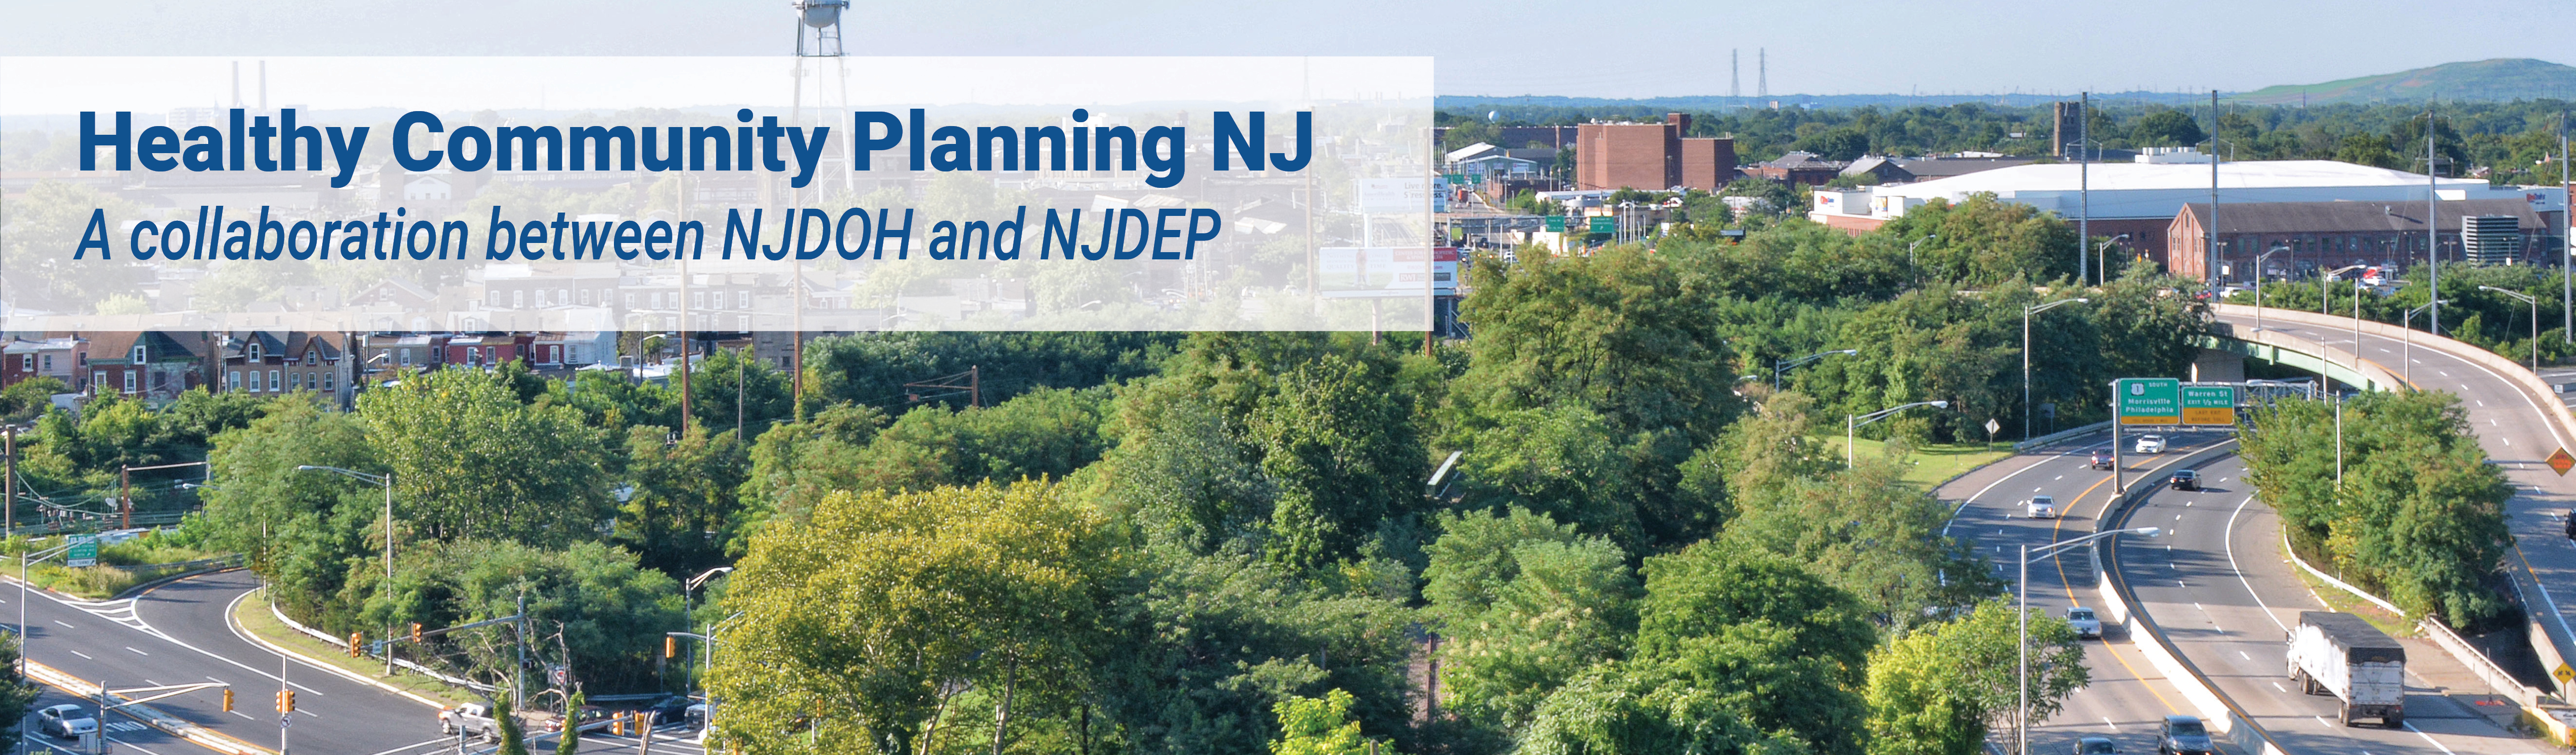 Promoting Better Health and a Better Environment for New Jersey - A collabration between the NJ Department of Health and Environmental Protection